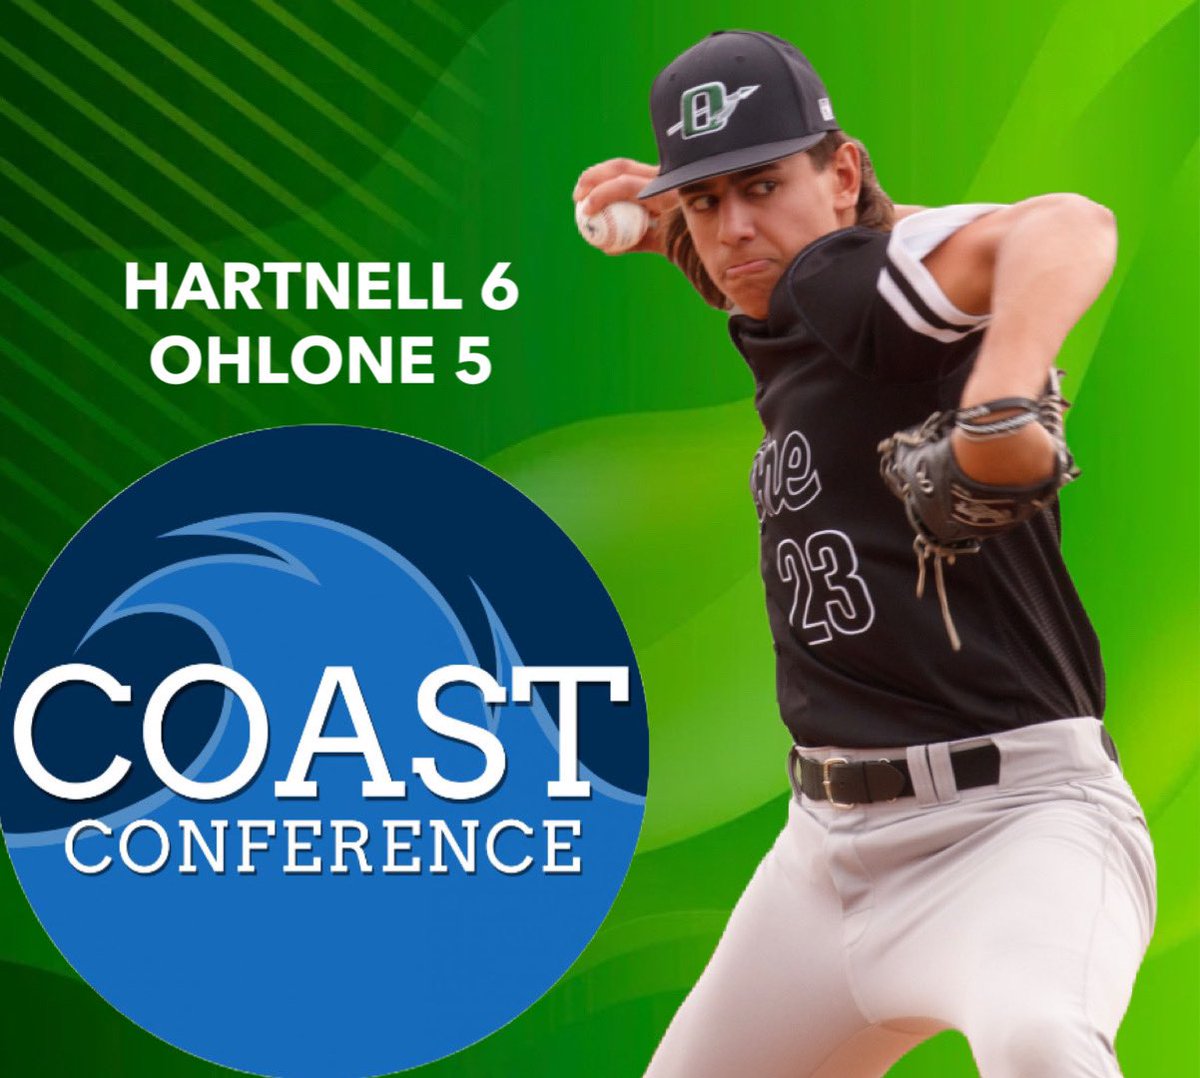 Ohlone falls to Hartnell, 6-5, to fall to 21-11 overall and 8-4 in Coast Conference play. Jayden Harper goes 8 innings, gives up 1 run, and K’s 9 hitters. Gades resume action again on Tuesday at home, with a 2:30 PM start.